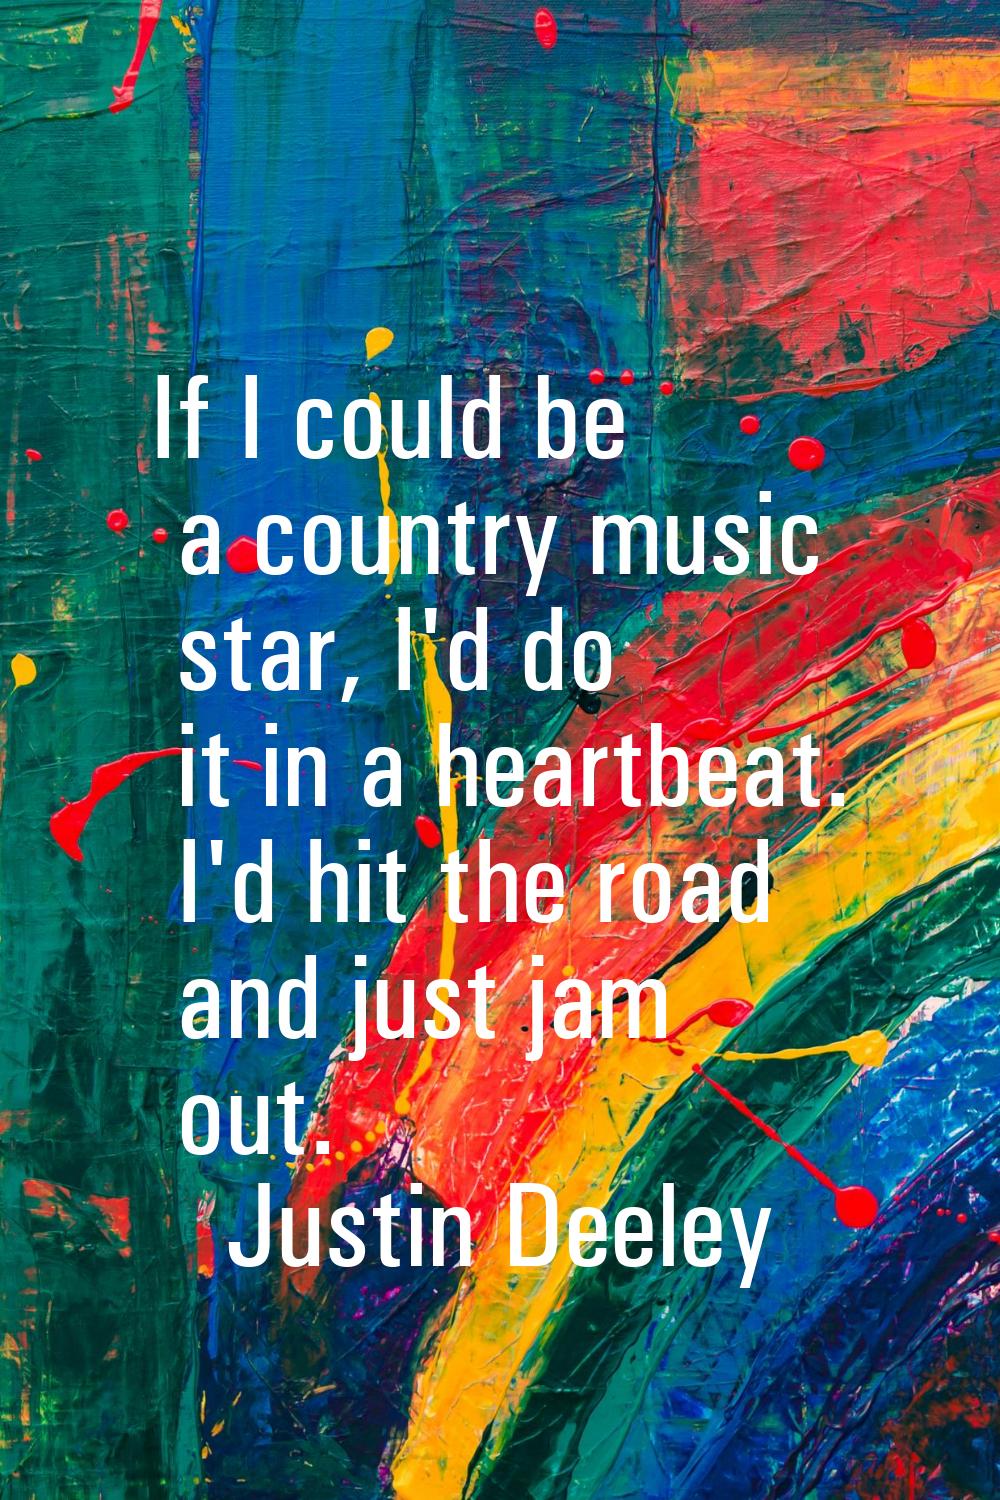 If I could be a country music star, I'd do it in a heartbeat. I'd hit the road and just jam out.